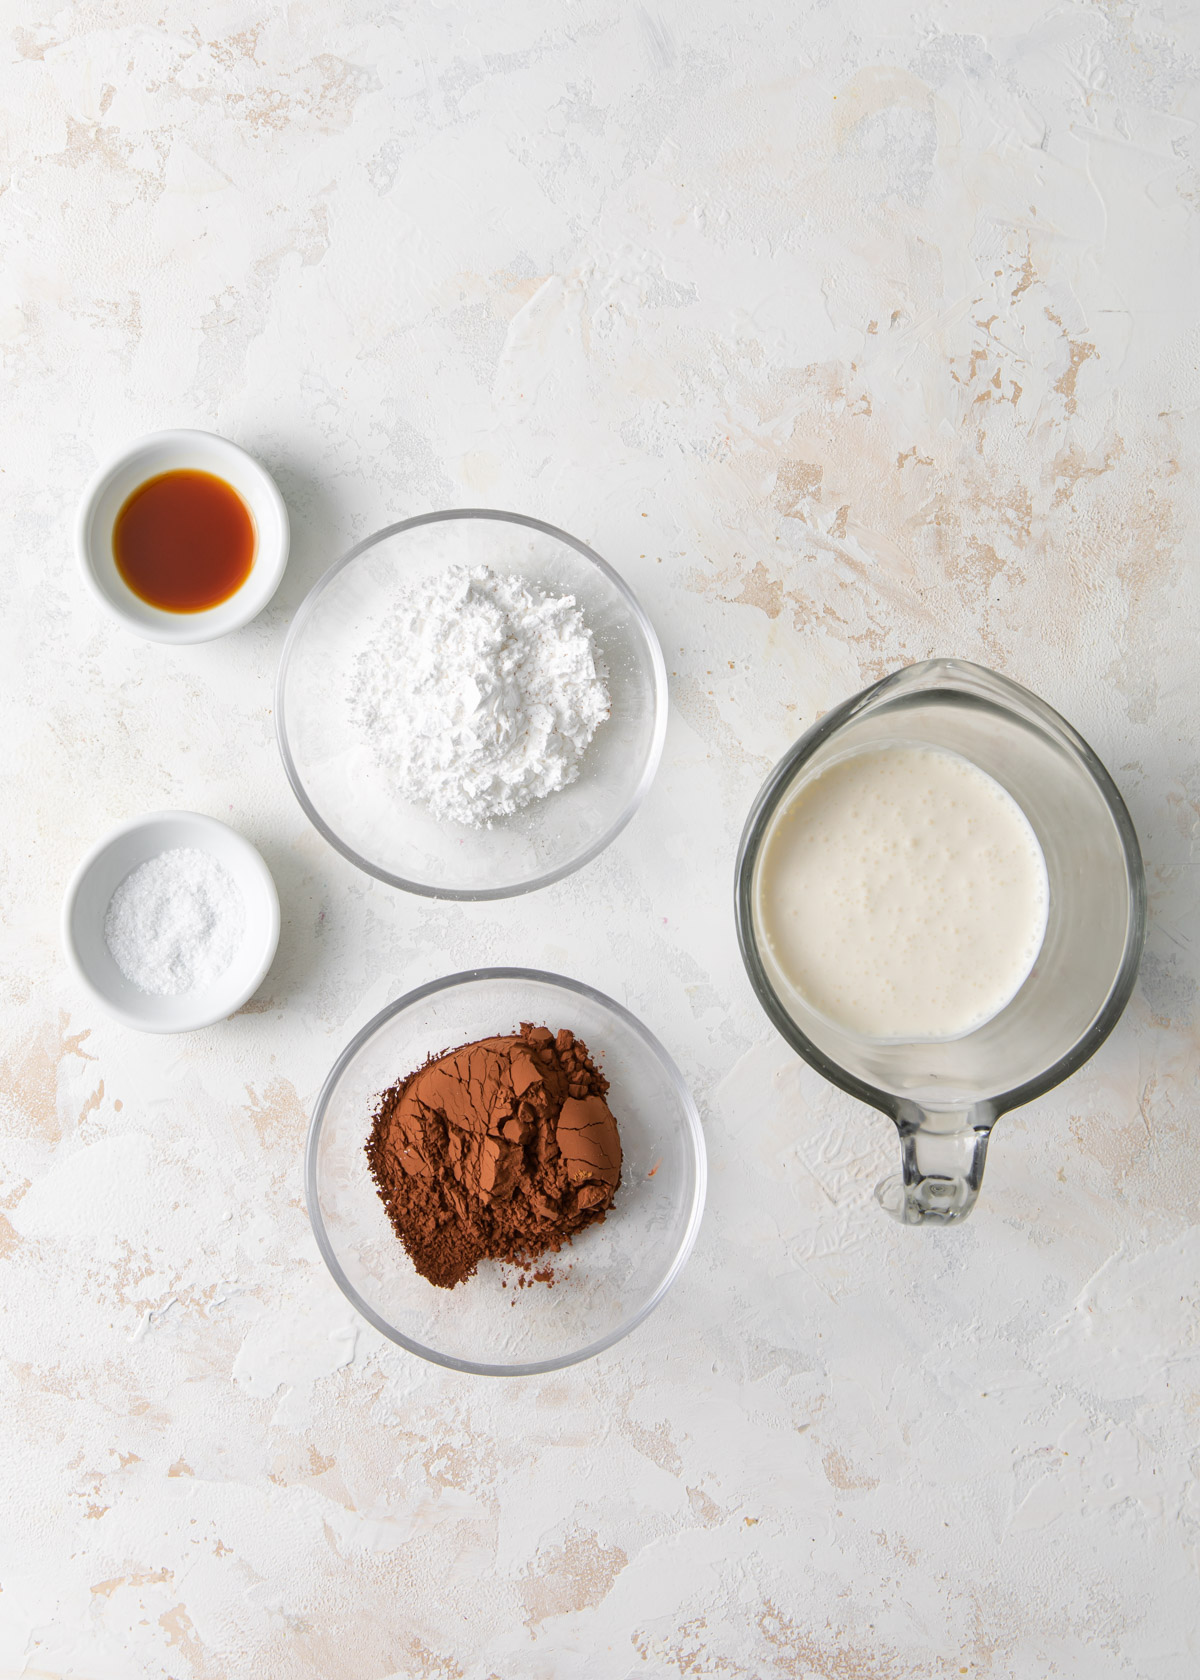 5 ingredients for making chocolate whipped cream on a white table